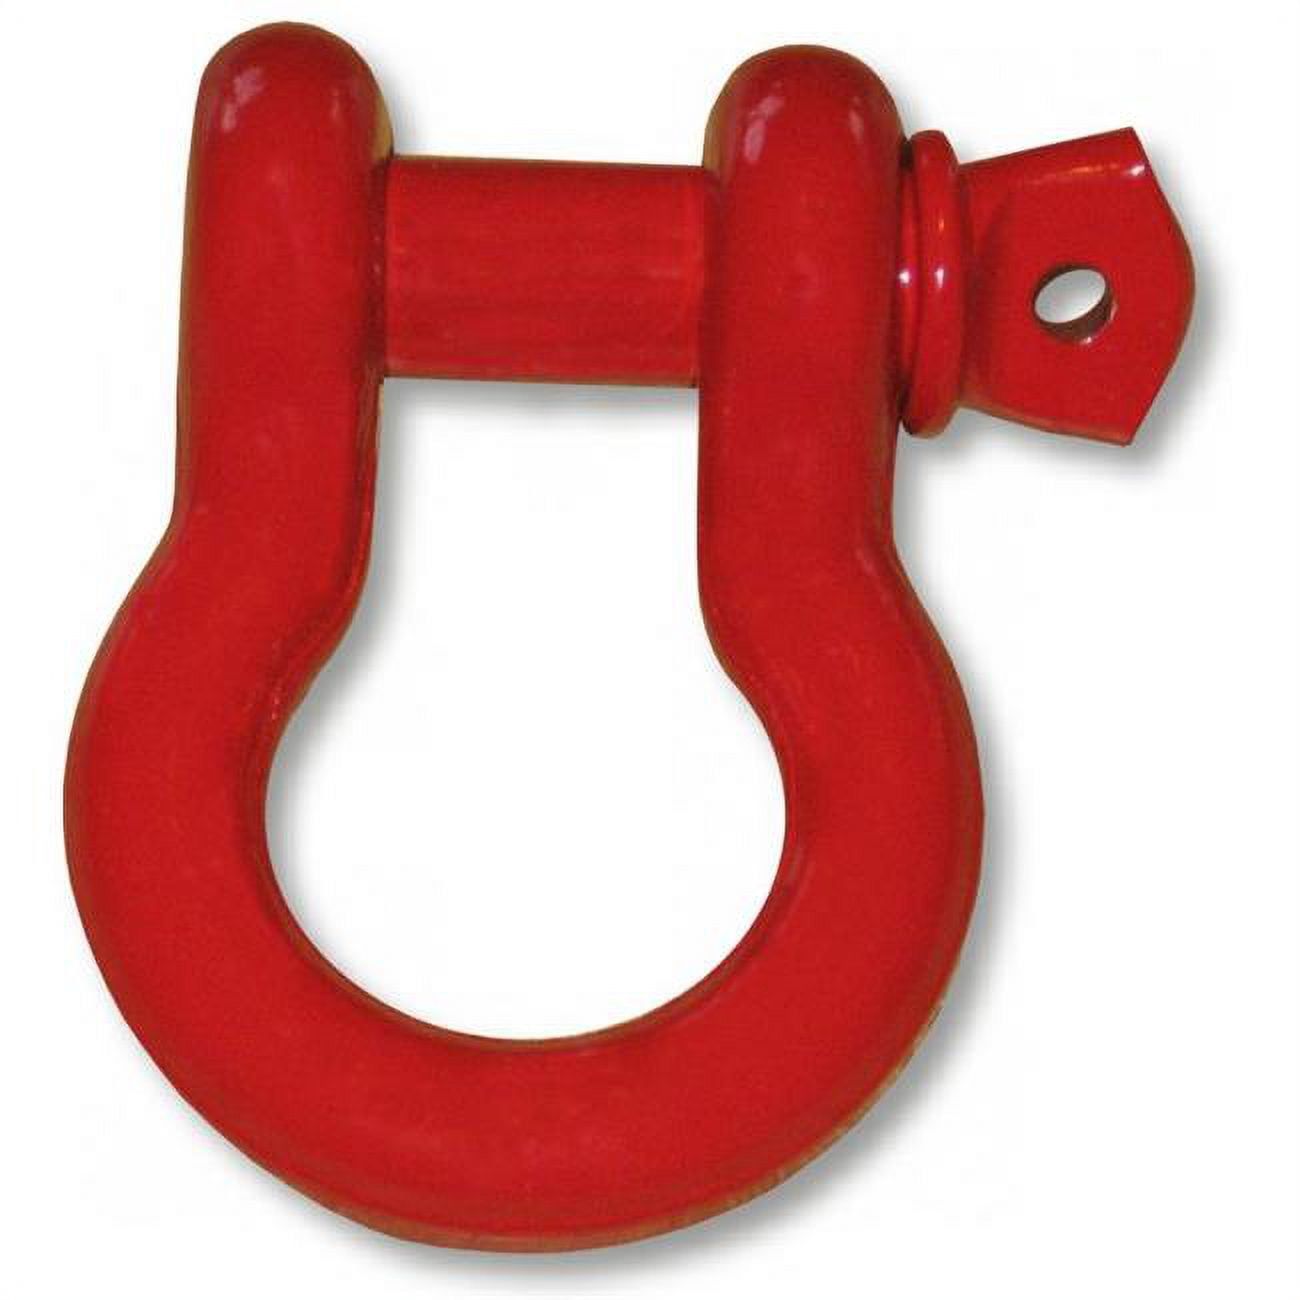 Picture of (It&amp;apos;s Big!) 1 inch MEGA D-Shackle - PATRIOT RED Powdercoated (SINGLE) (4X4 RECOVERY)